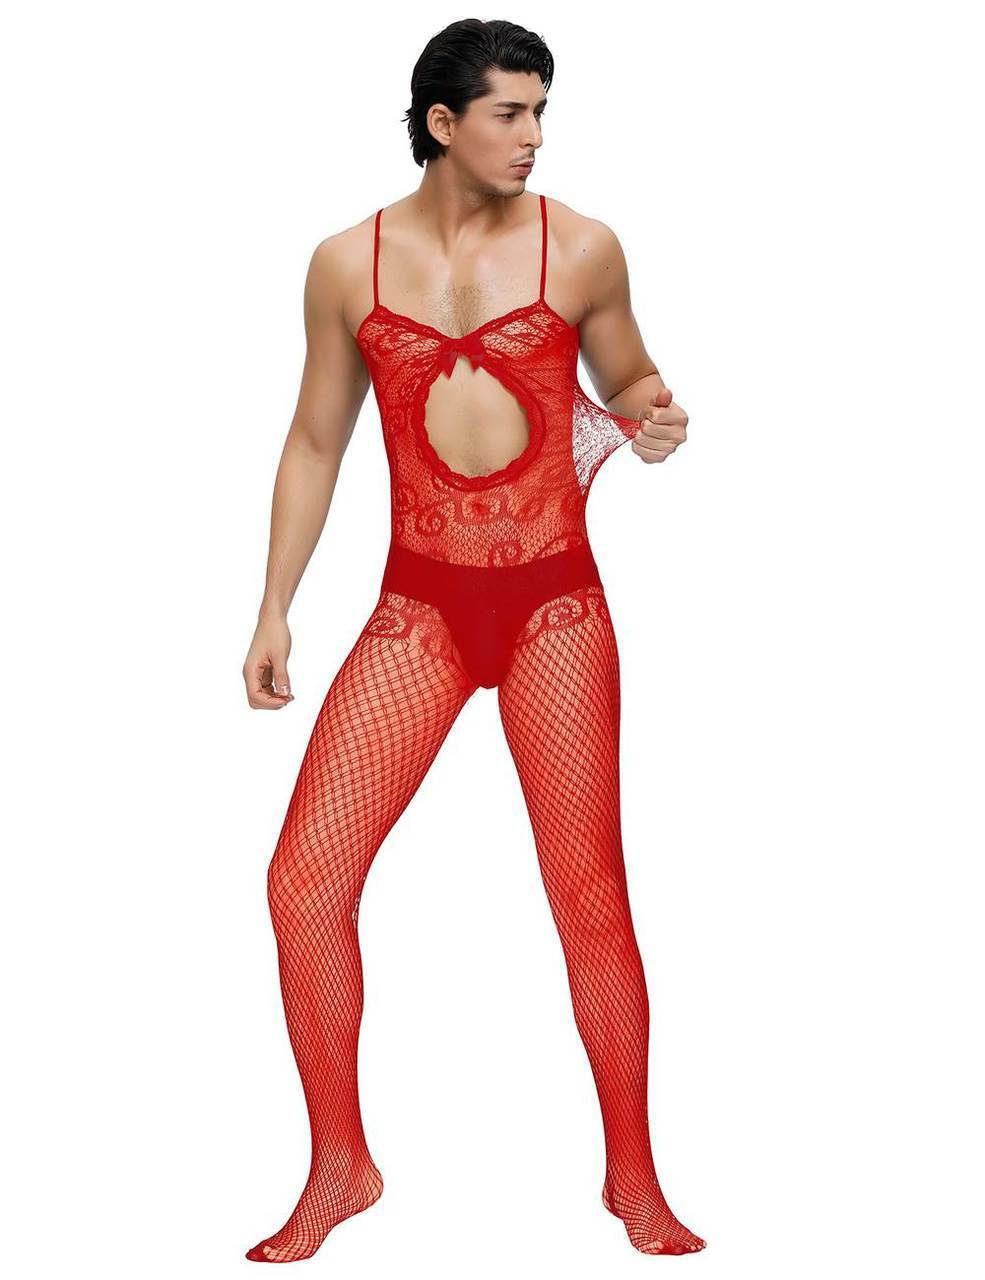 Mens Lingerie Crocheted Fishnet Bodystocking with Keyhole Front Red